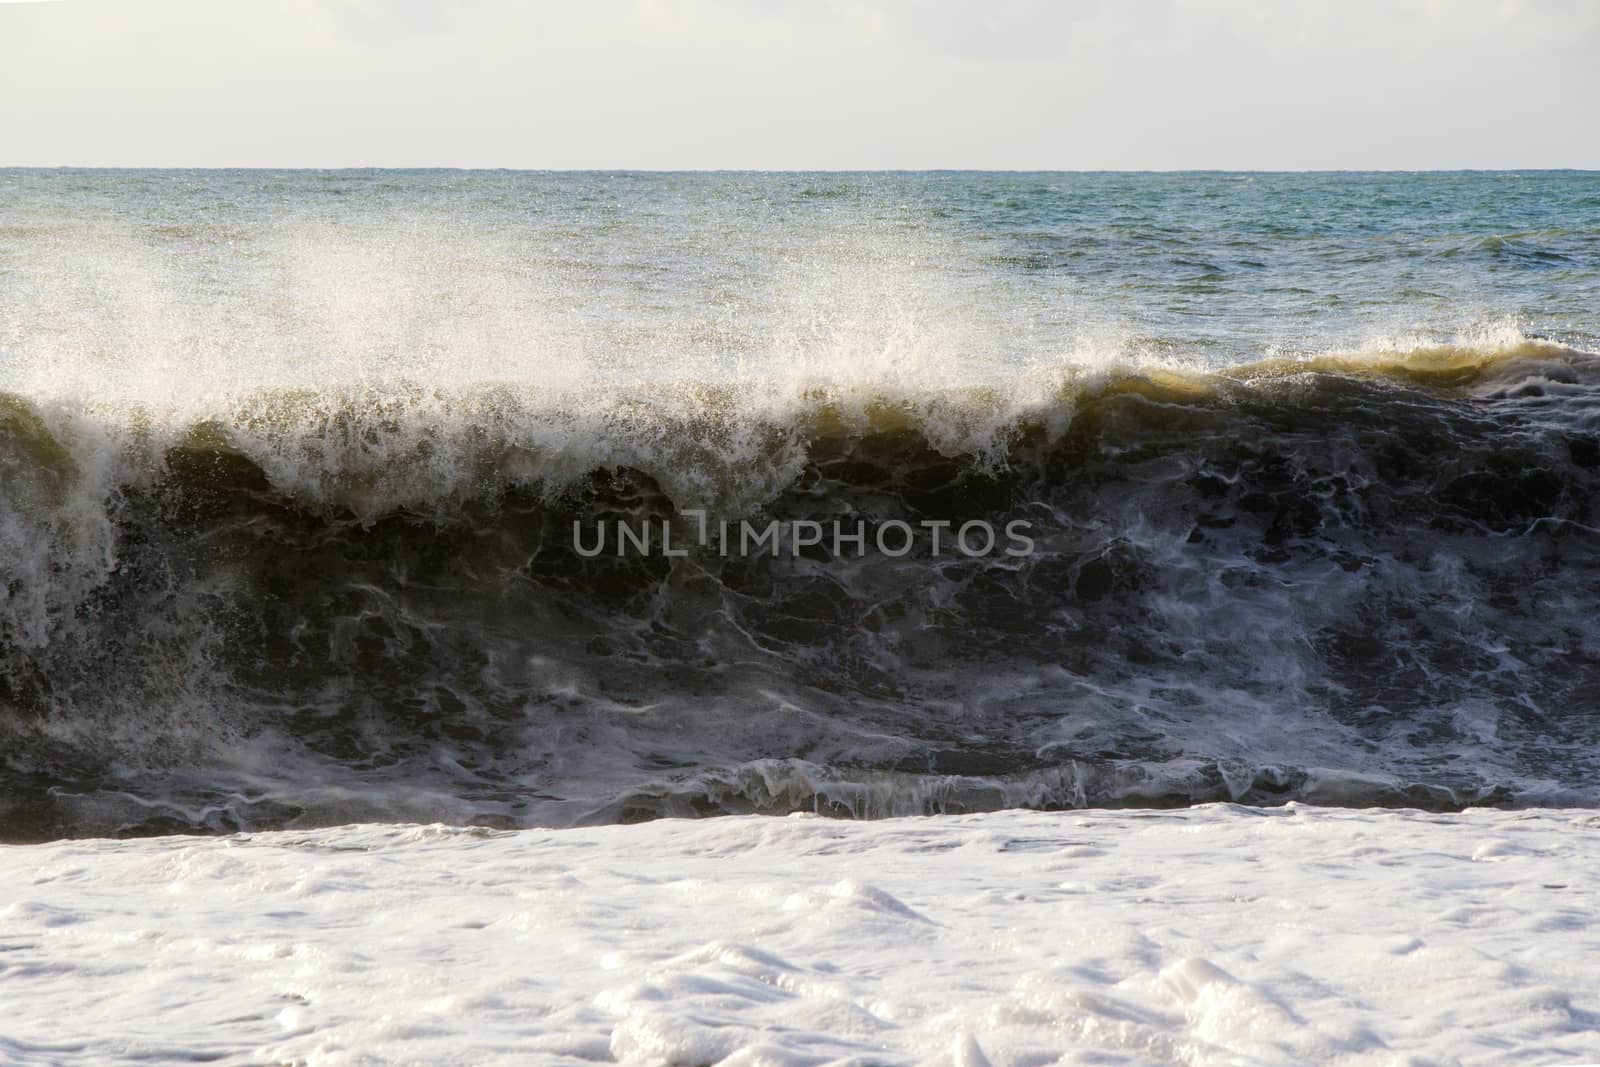 Sea and waves, stormy weather, waves and splashes in Batumi, Georgia. Stormy Black sea. Water background.